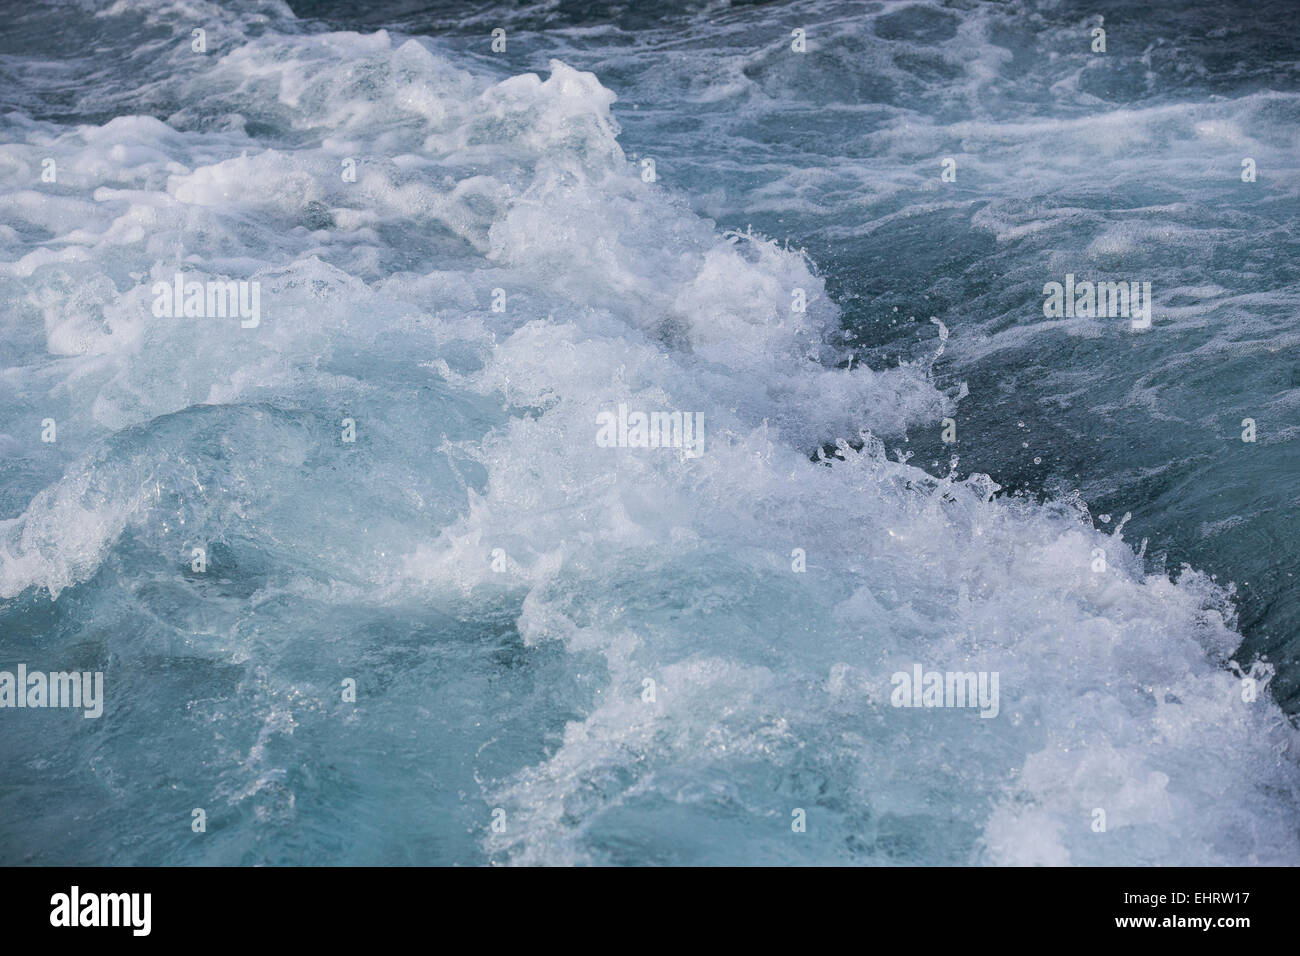 White water from a rushing river. Stock Photo